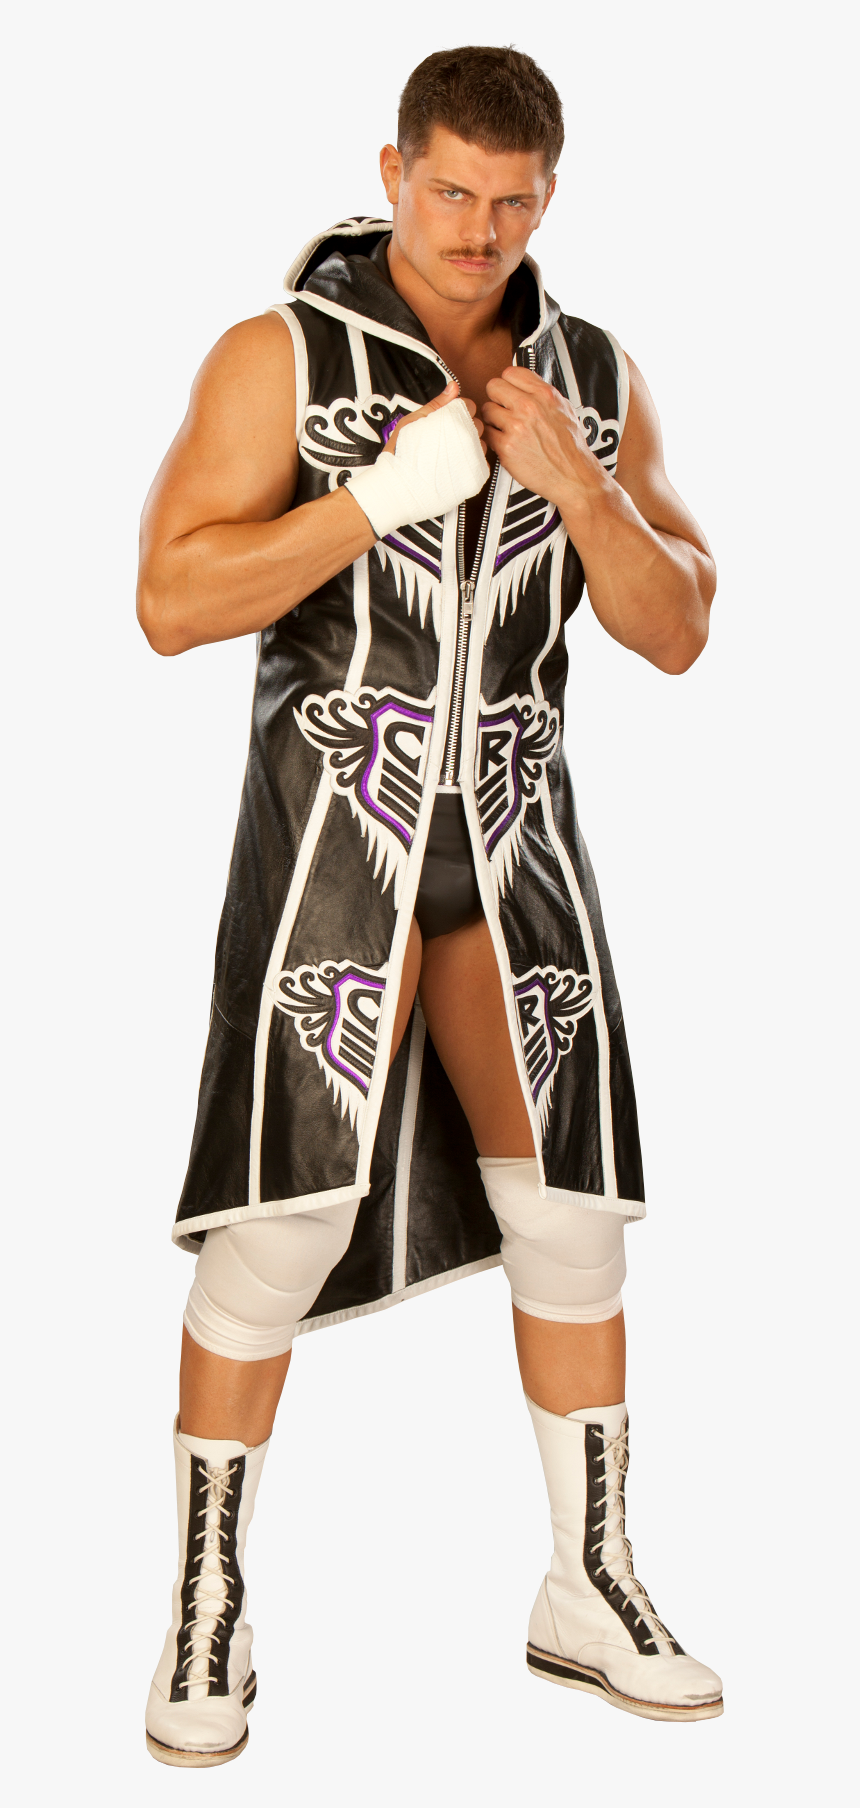 Cody Rhodes Png - Cody Rhodes Wwe Transparent, Png Download, Free Download